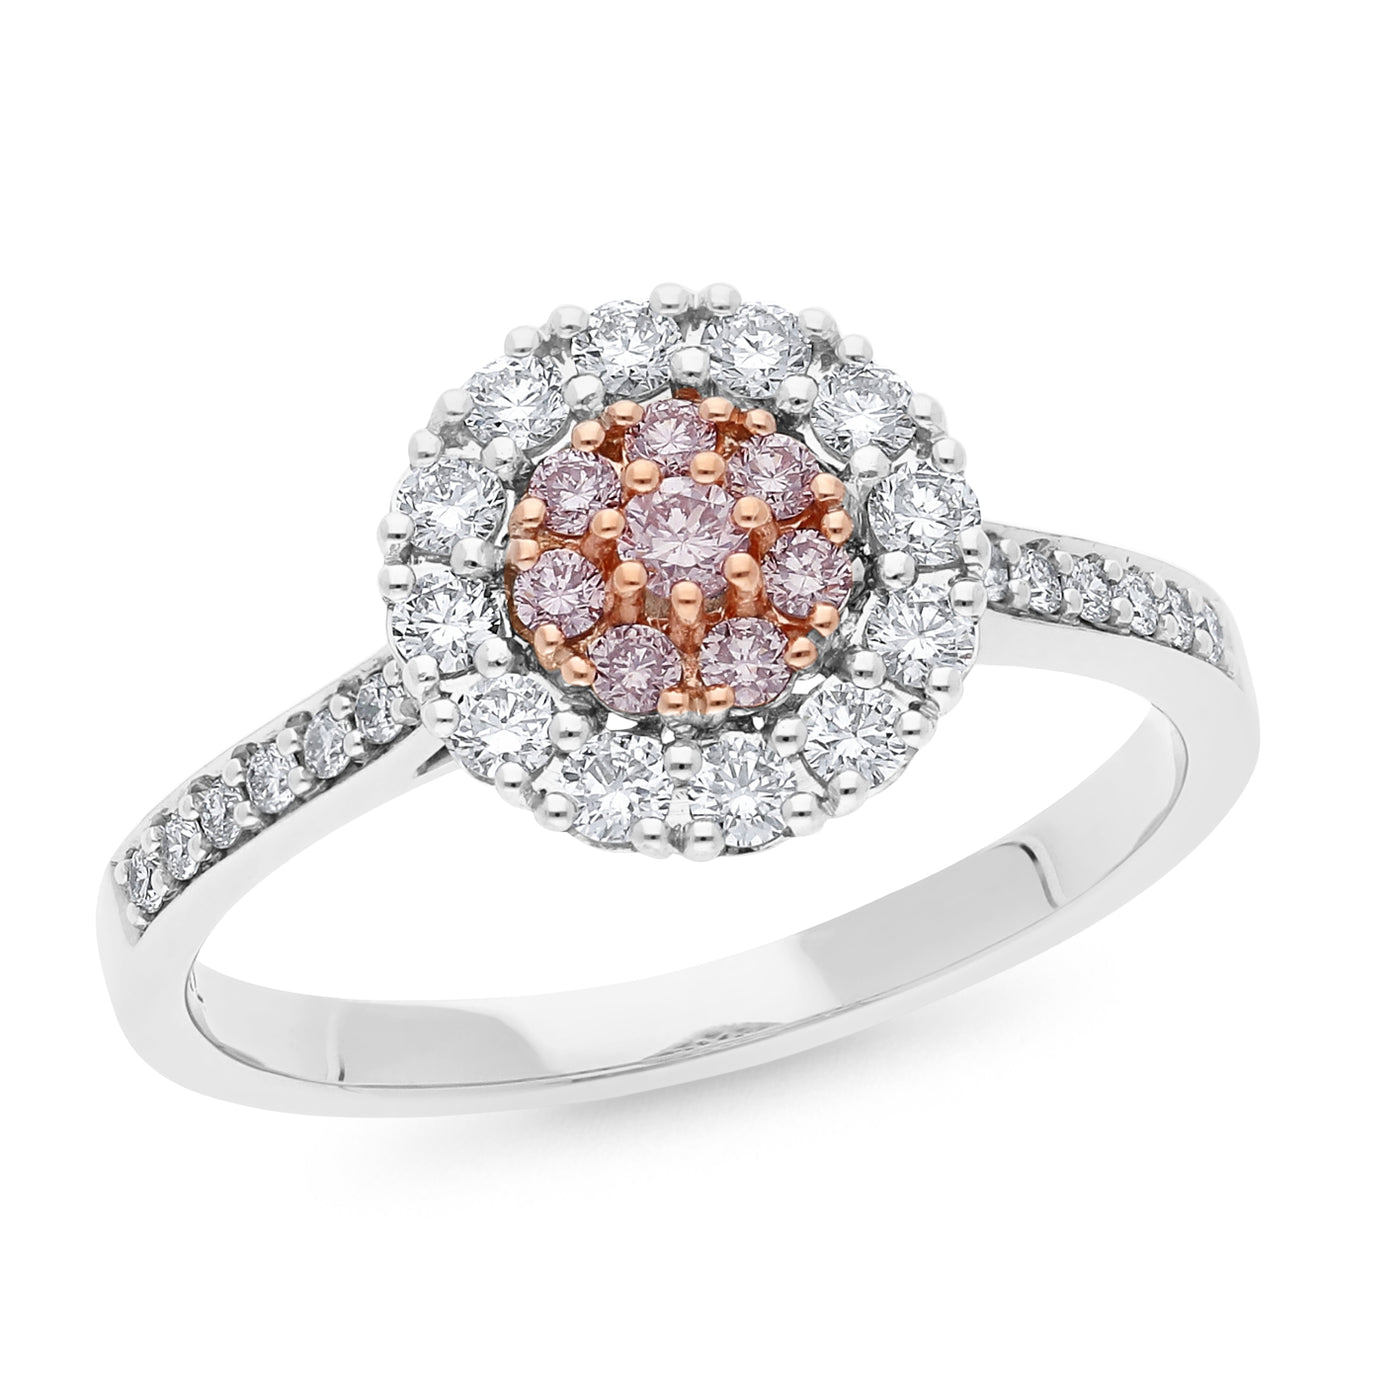 9ct White Gold, White and Natural Pink Argyle Diamond Engagement Ring